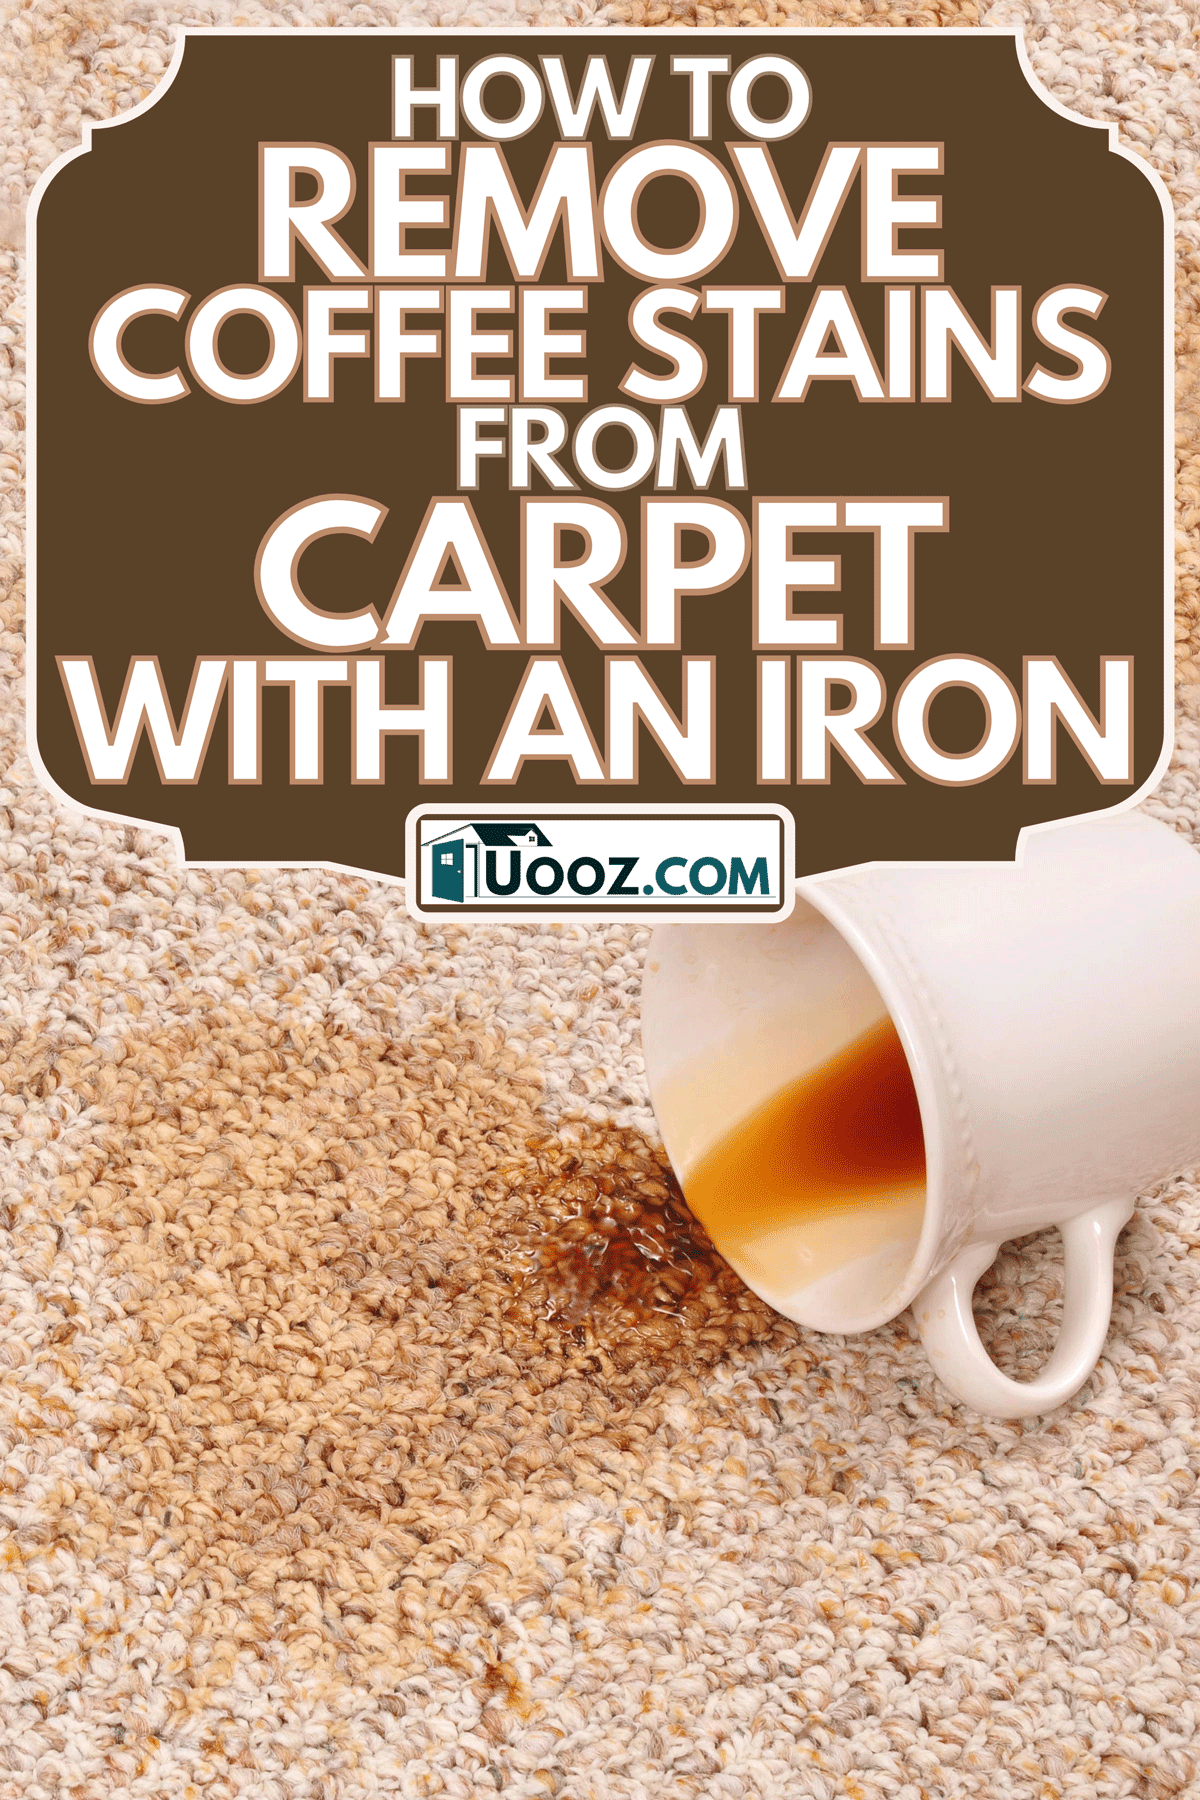 A Spilled coffee on the carpet, How To Remove Coffee Stains From Carpet With An Iron